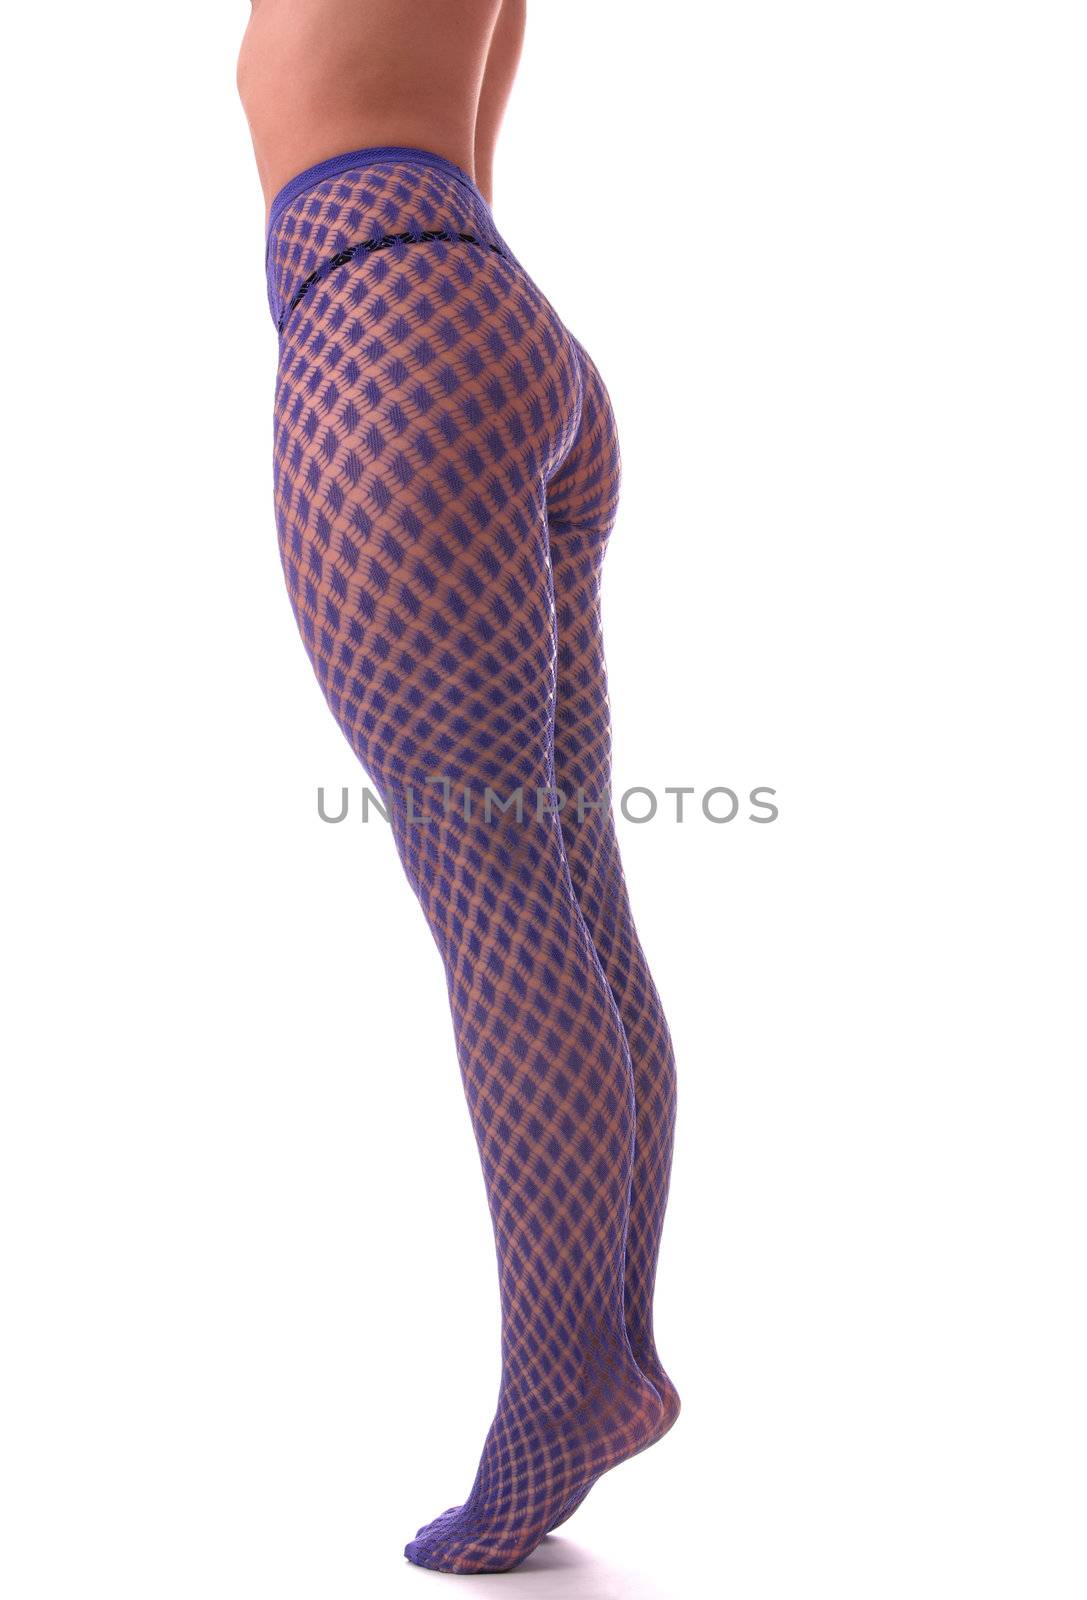 Sexy woman legs in violet stockings isolated on white background